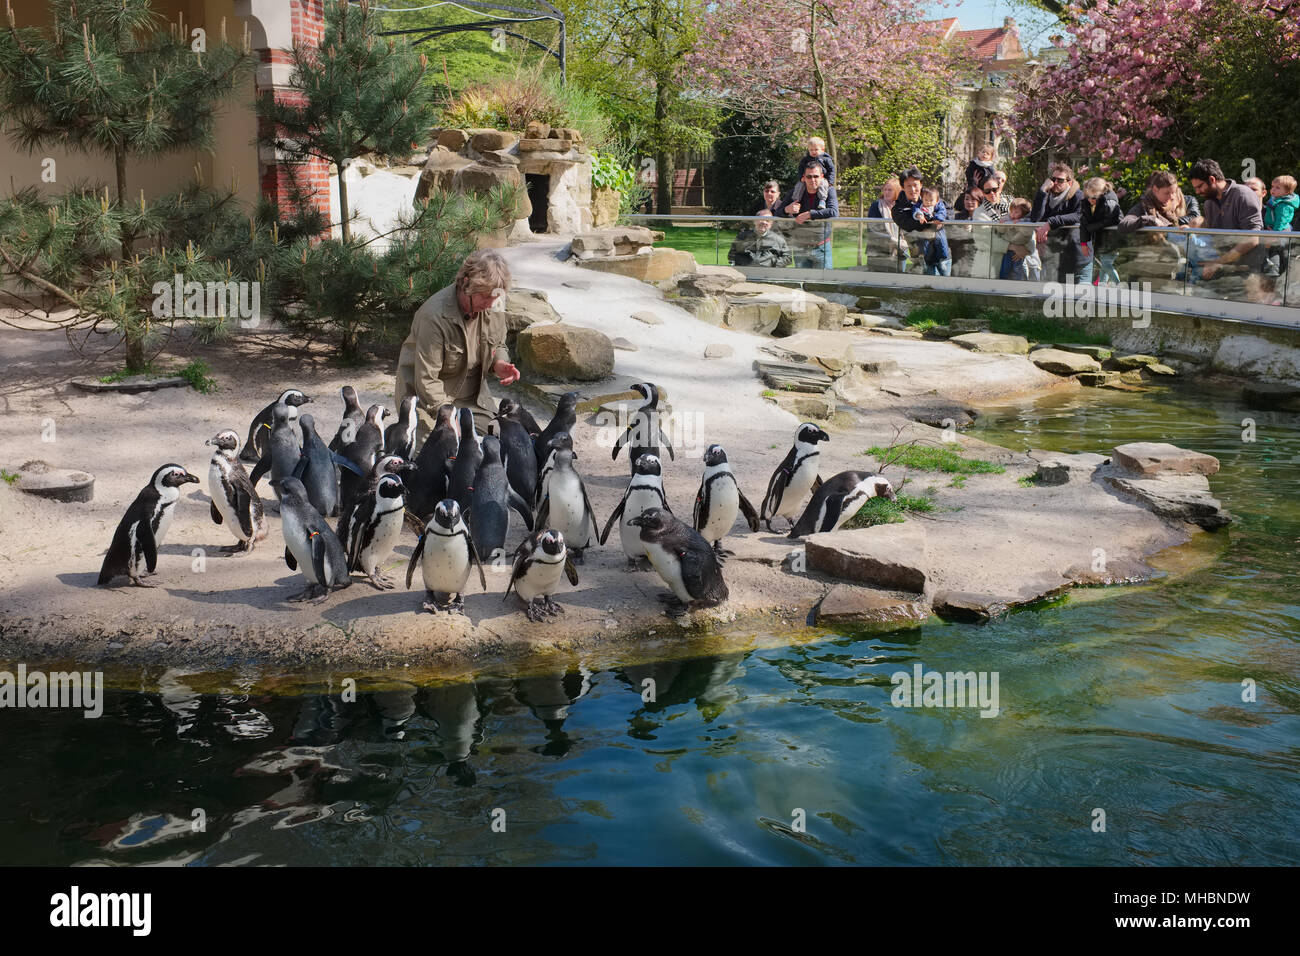 Zookeeper in the Antwerp zoo is feeding African Penguins (Spheniscus demersus) whilst spectators are watching Stock Photo